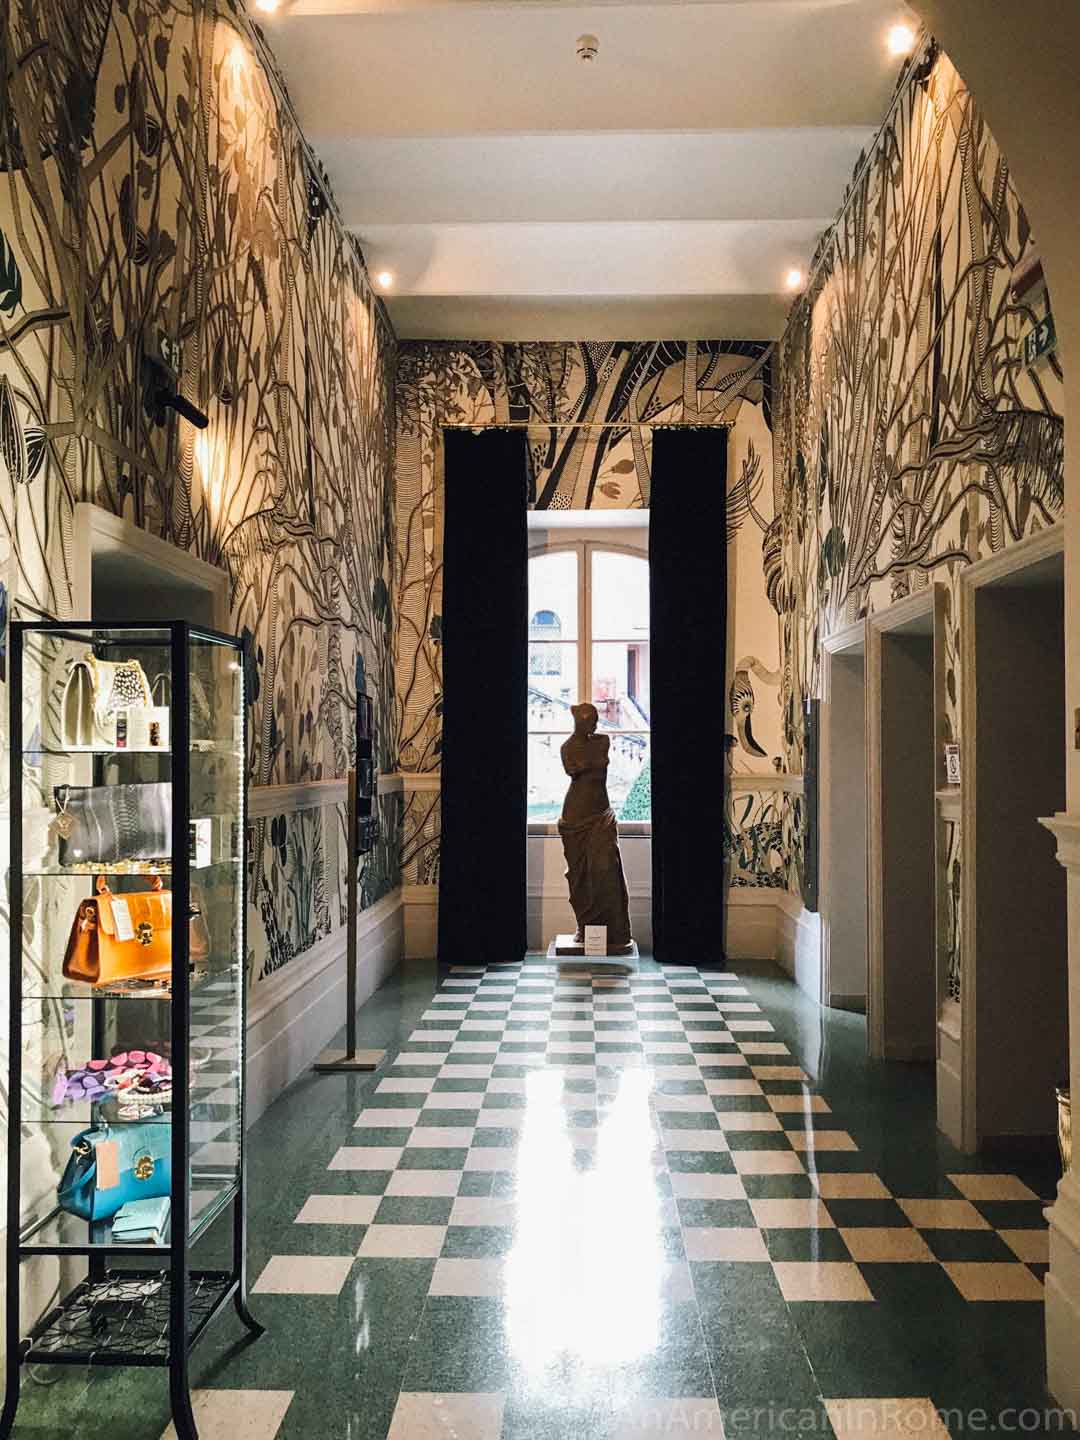 patterned wallpaper and a statue at the end of hallway lit by a window in Roma Luxus house